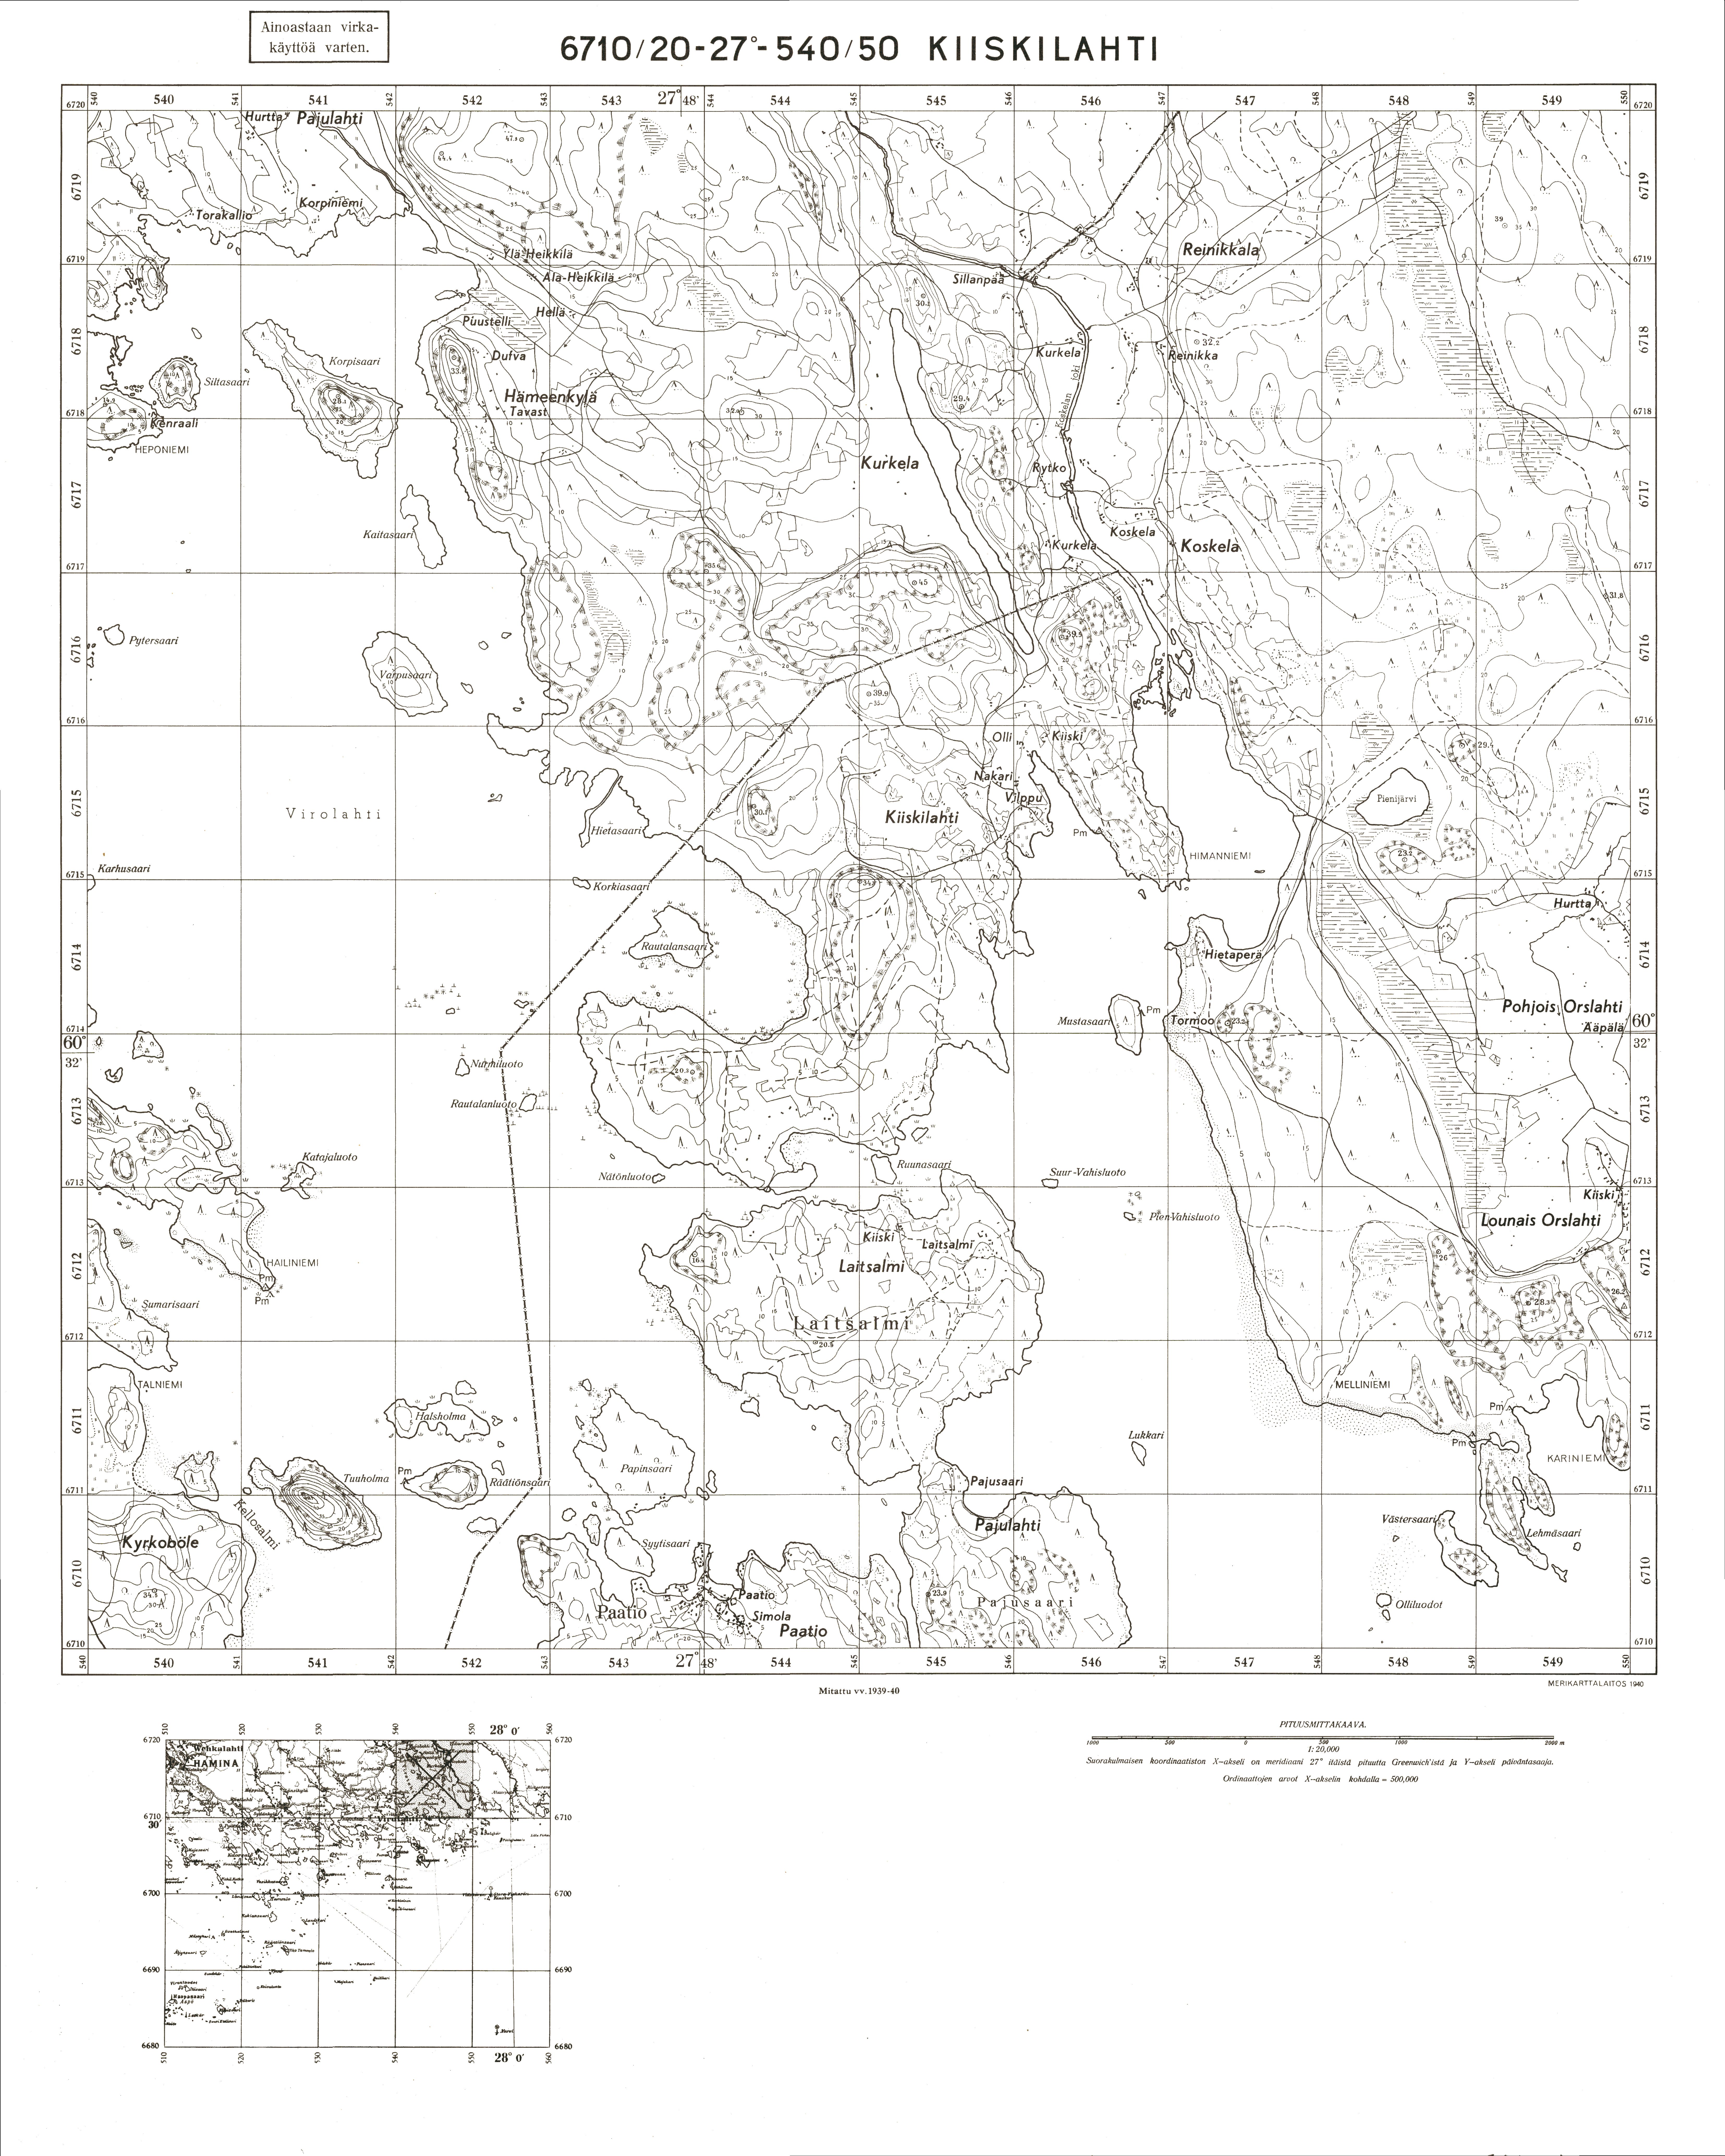 Železnovskij, Peninsula. Kiiskilahti. Topografikartta 304401. Topographic map from 1940. Use the zooming tool to explore in higher level of detail. Obtain as a quality print or high resolution image